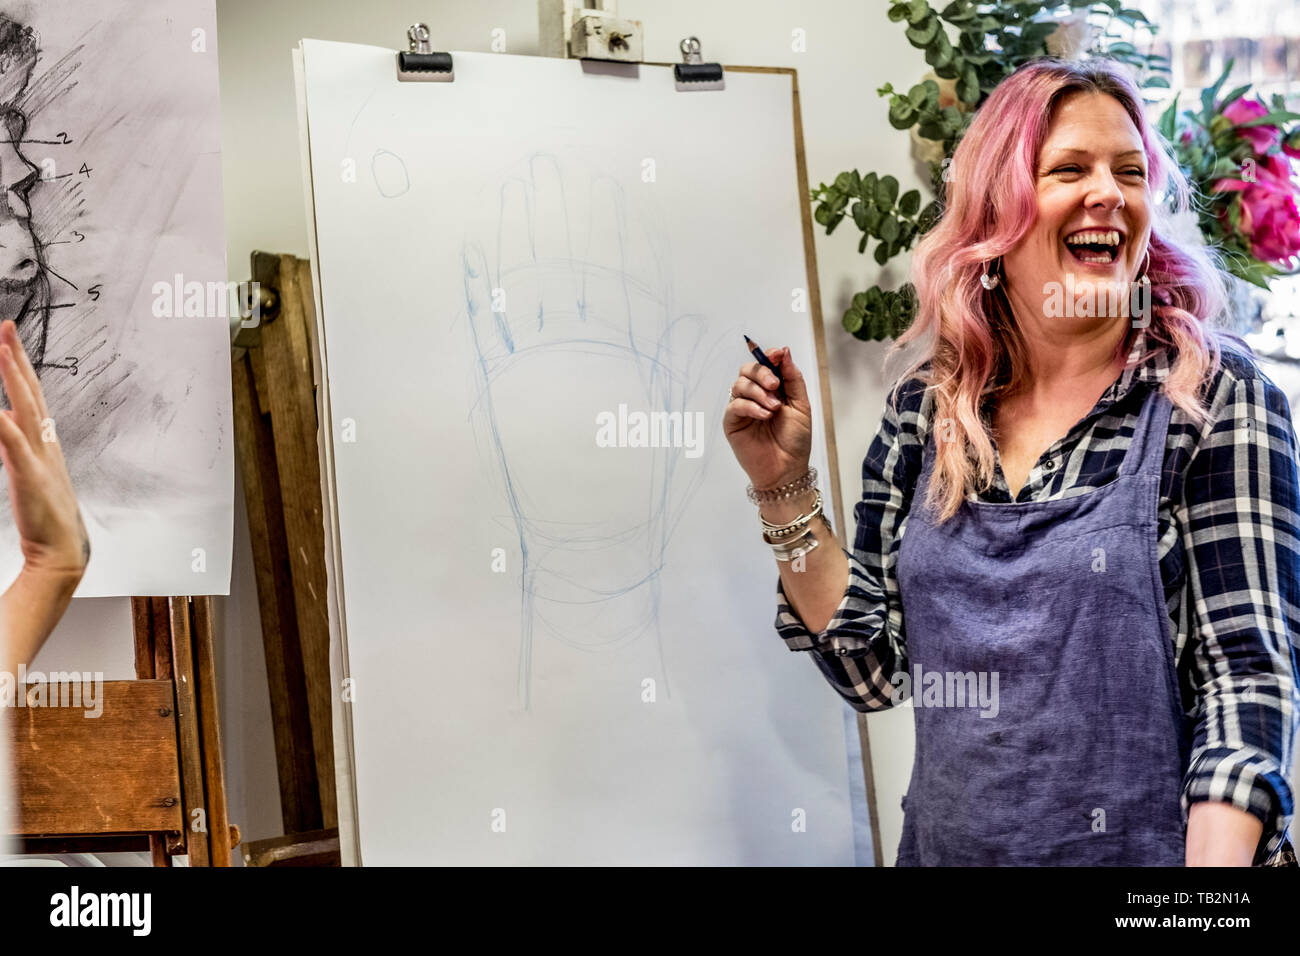 Laughing woman wearing apron standing at an easel, drawing of human hand. Stock Photo